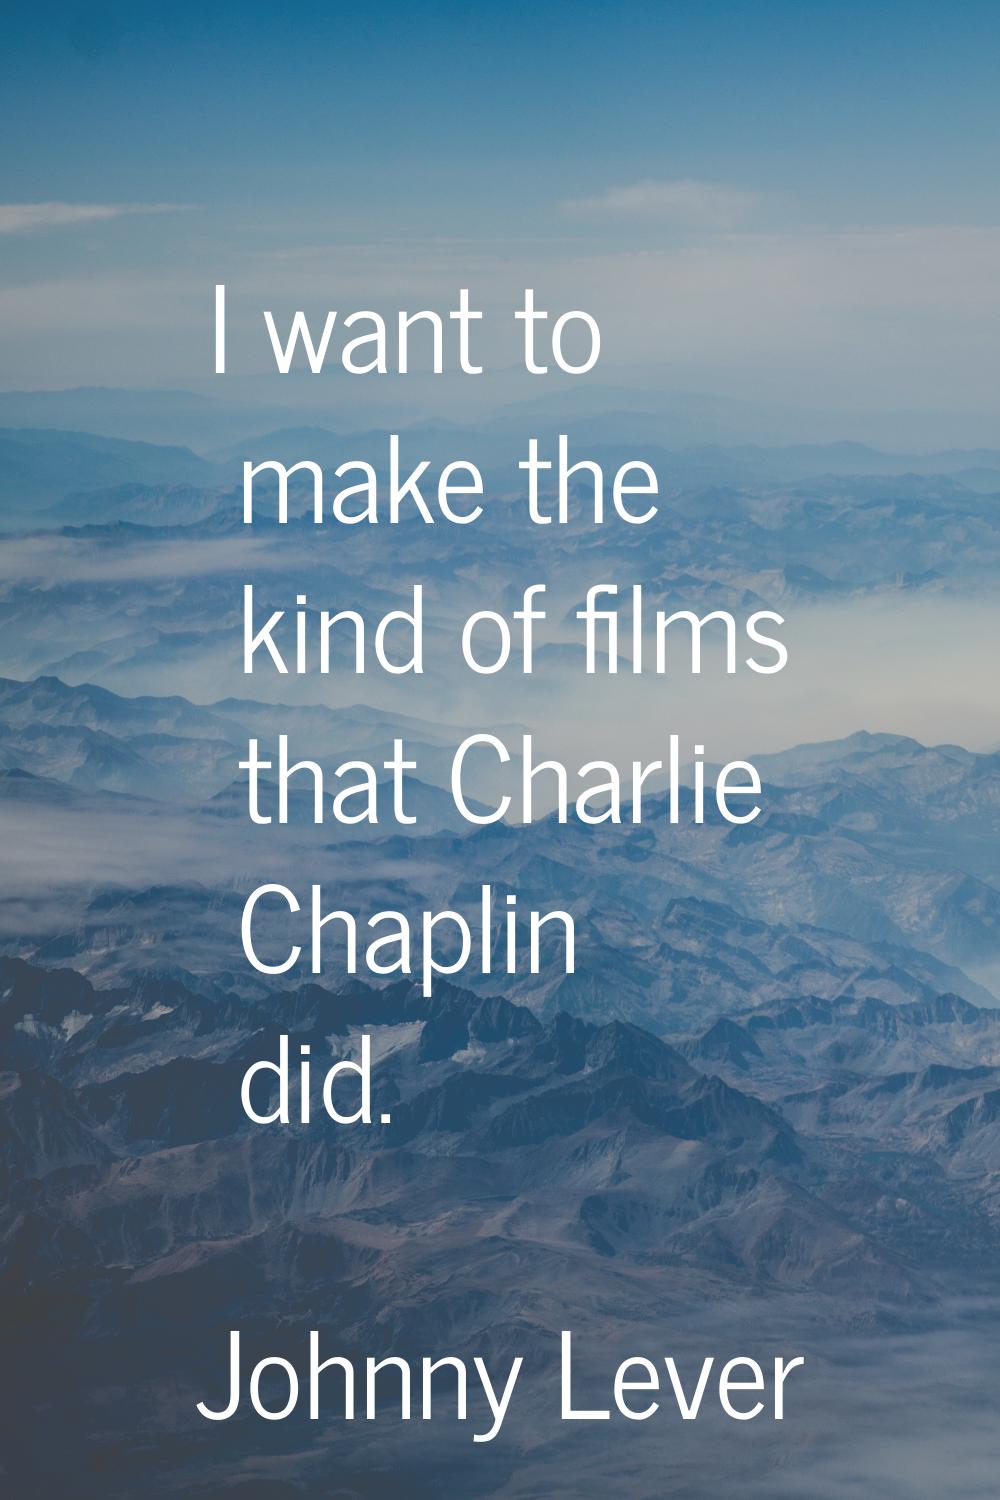 I want to make the kind of films that Charlie Chaplin did.